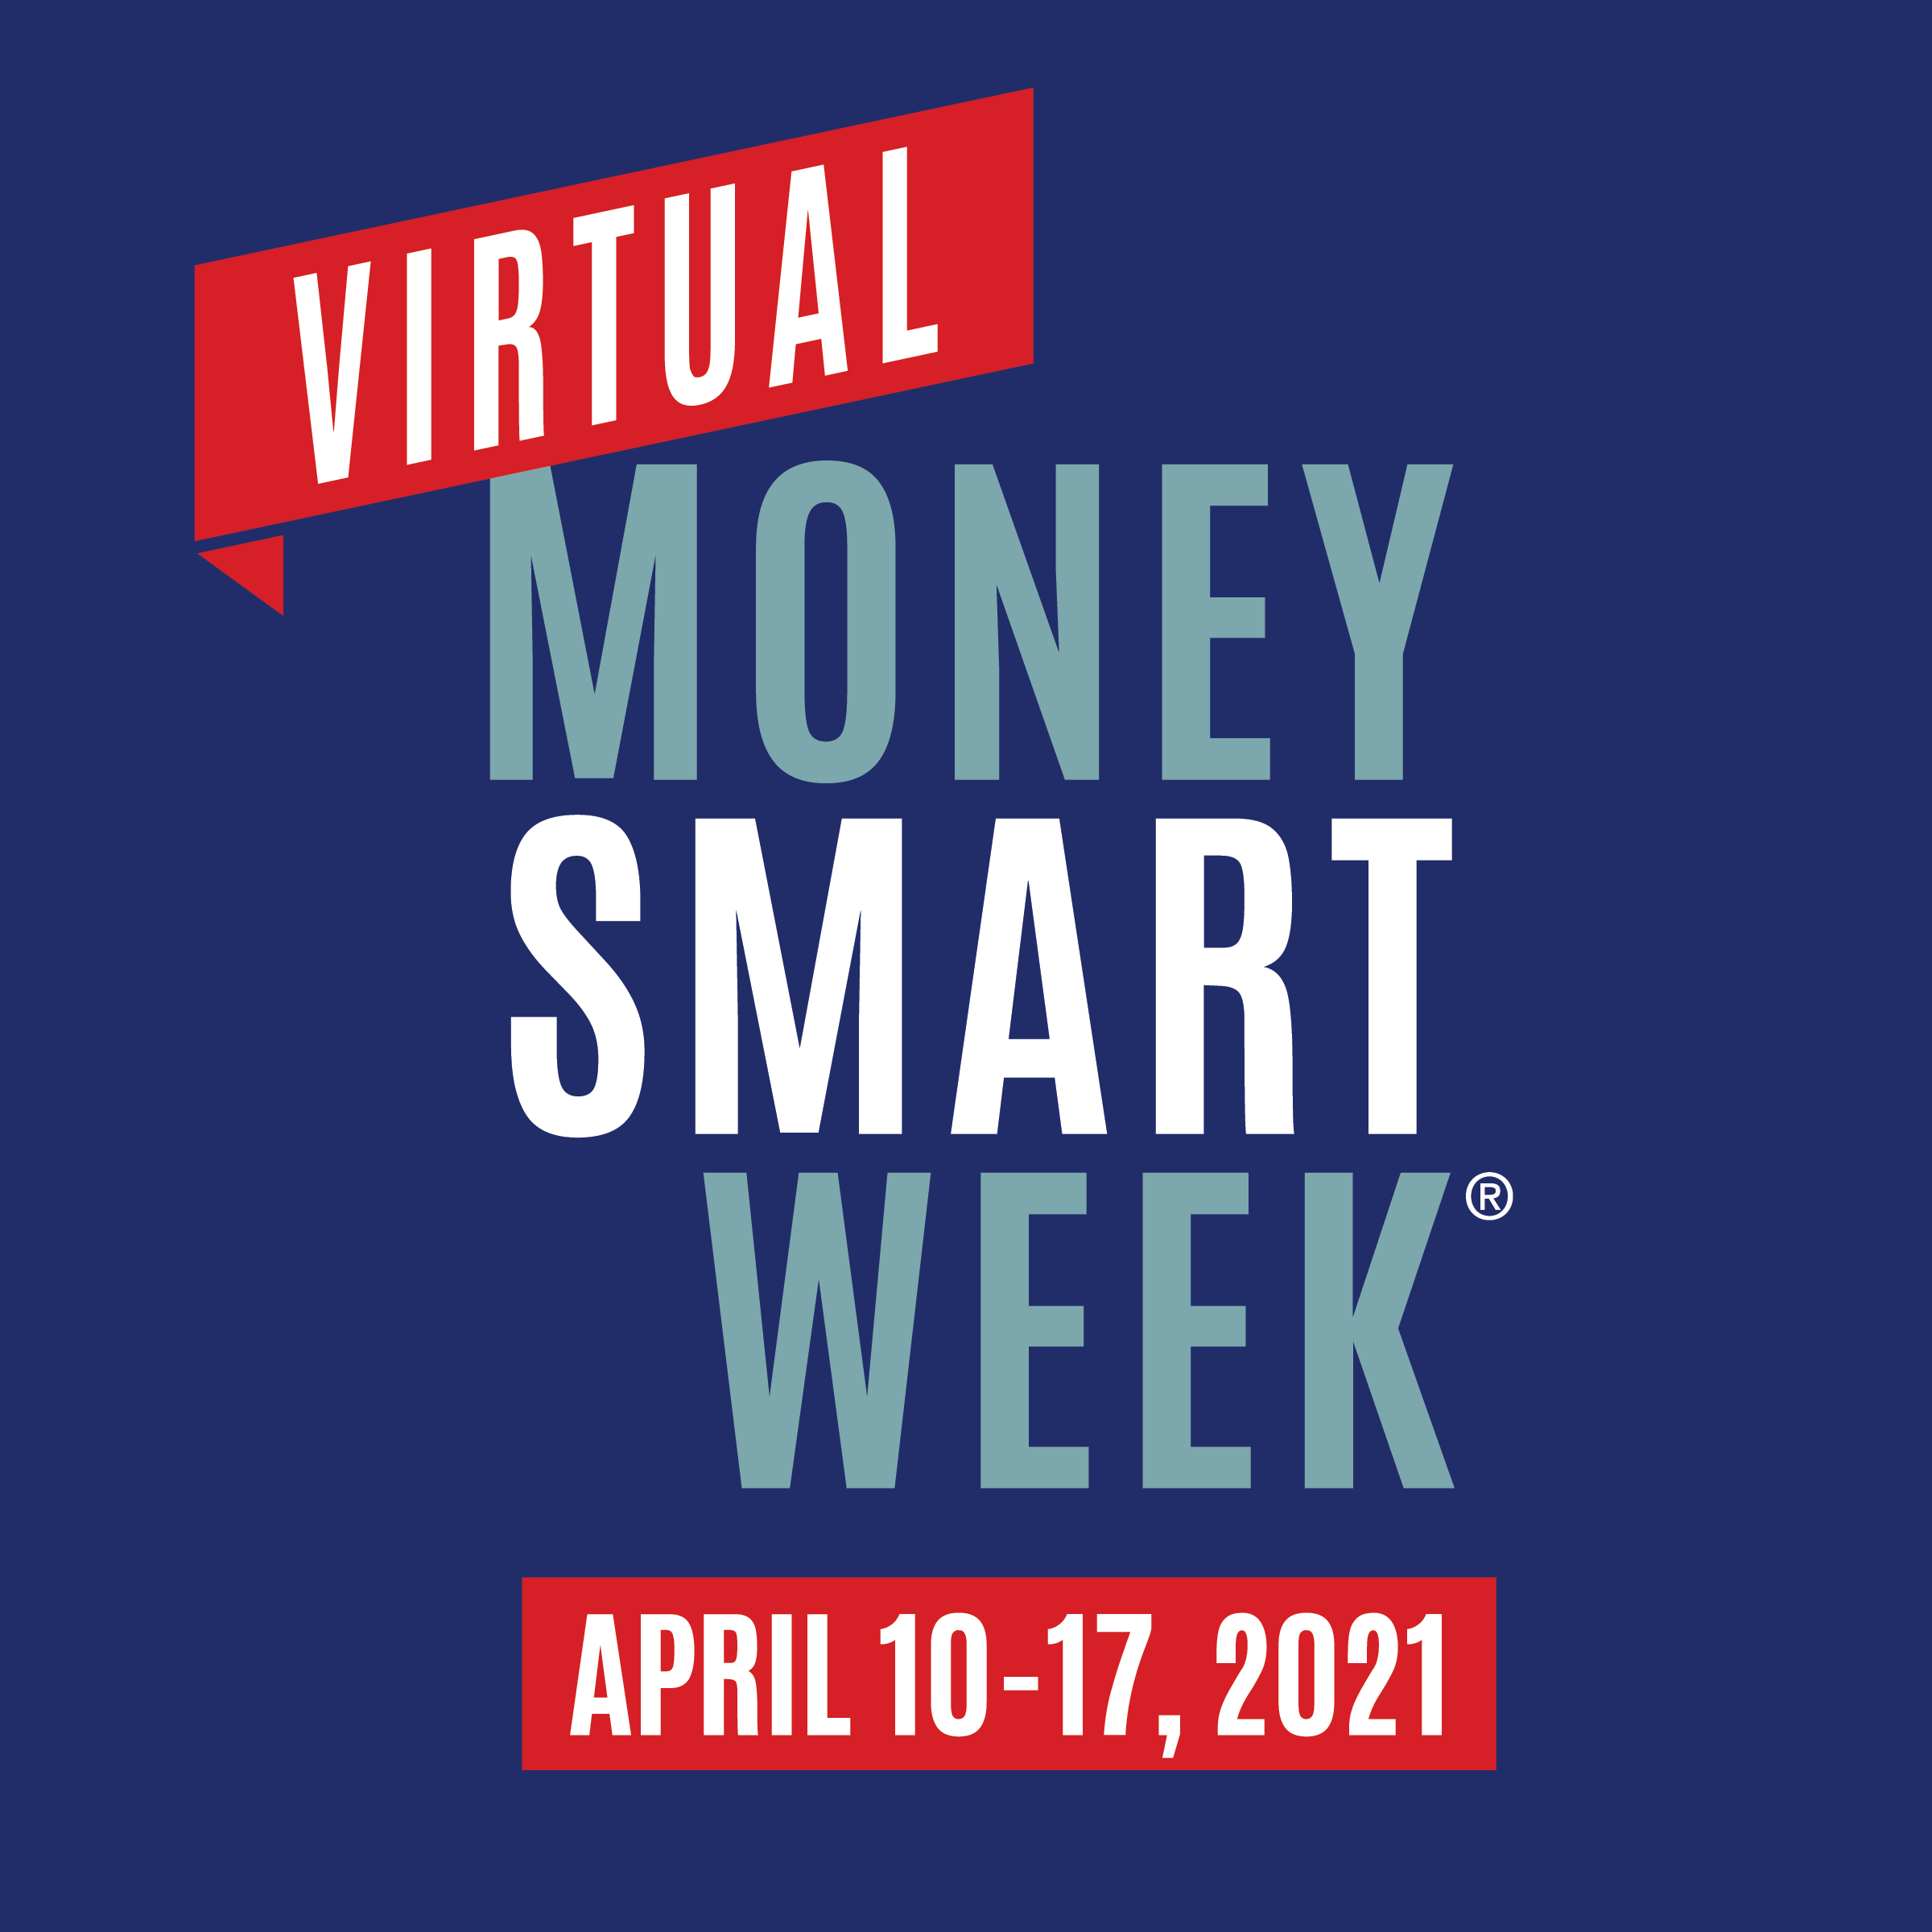 Money Smart Week 2021: Learn to manage your money with a week of programs